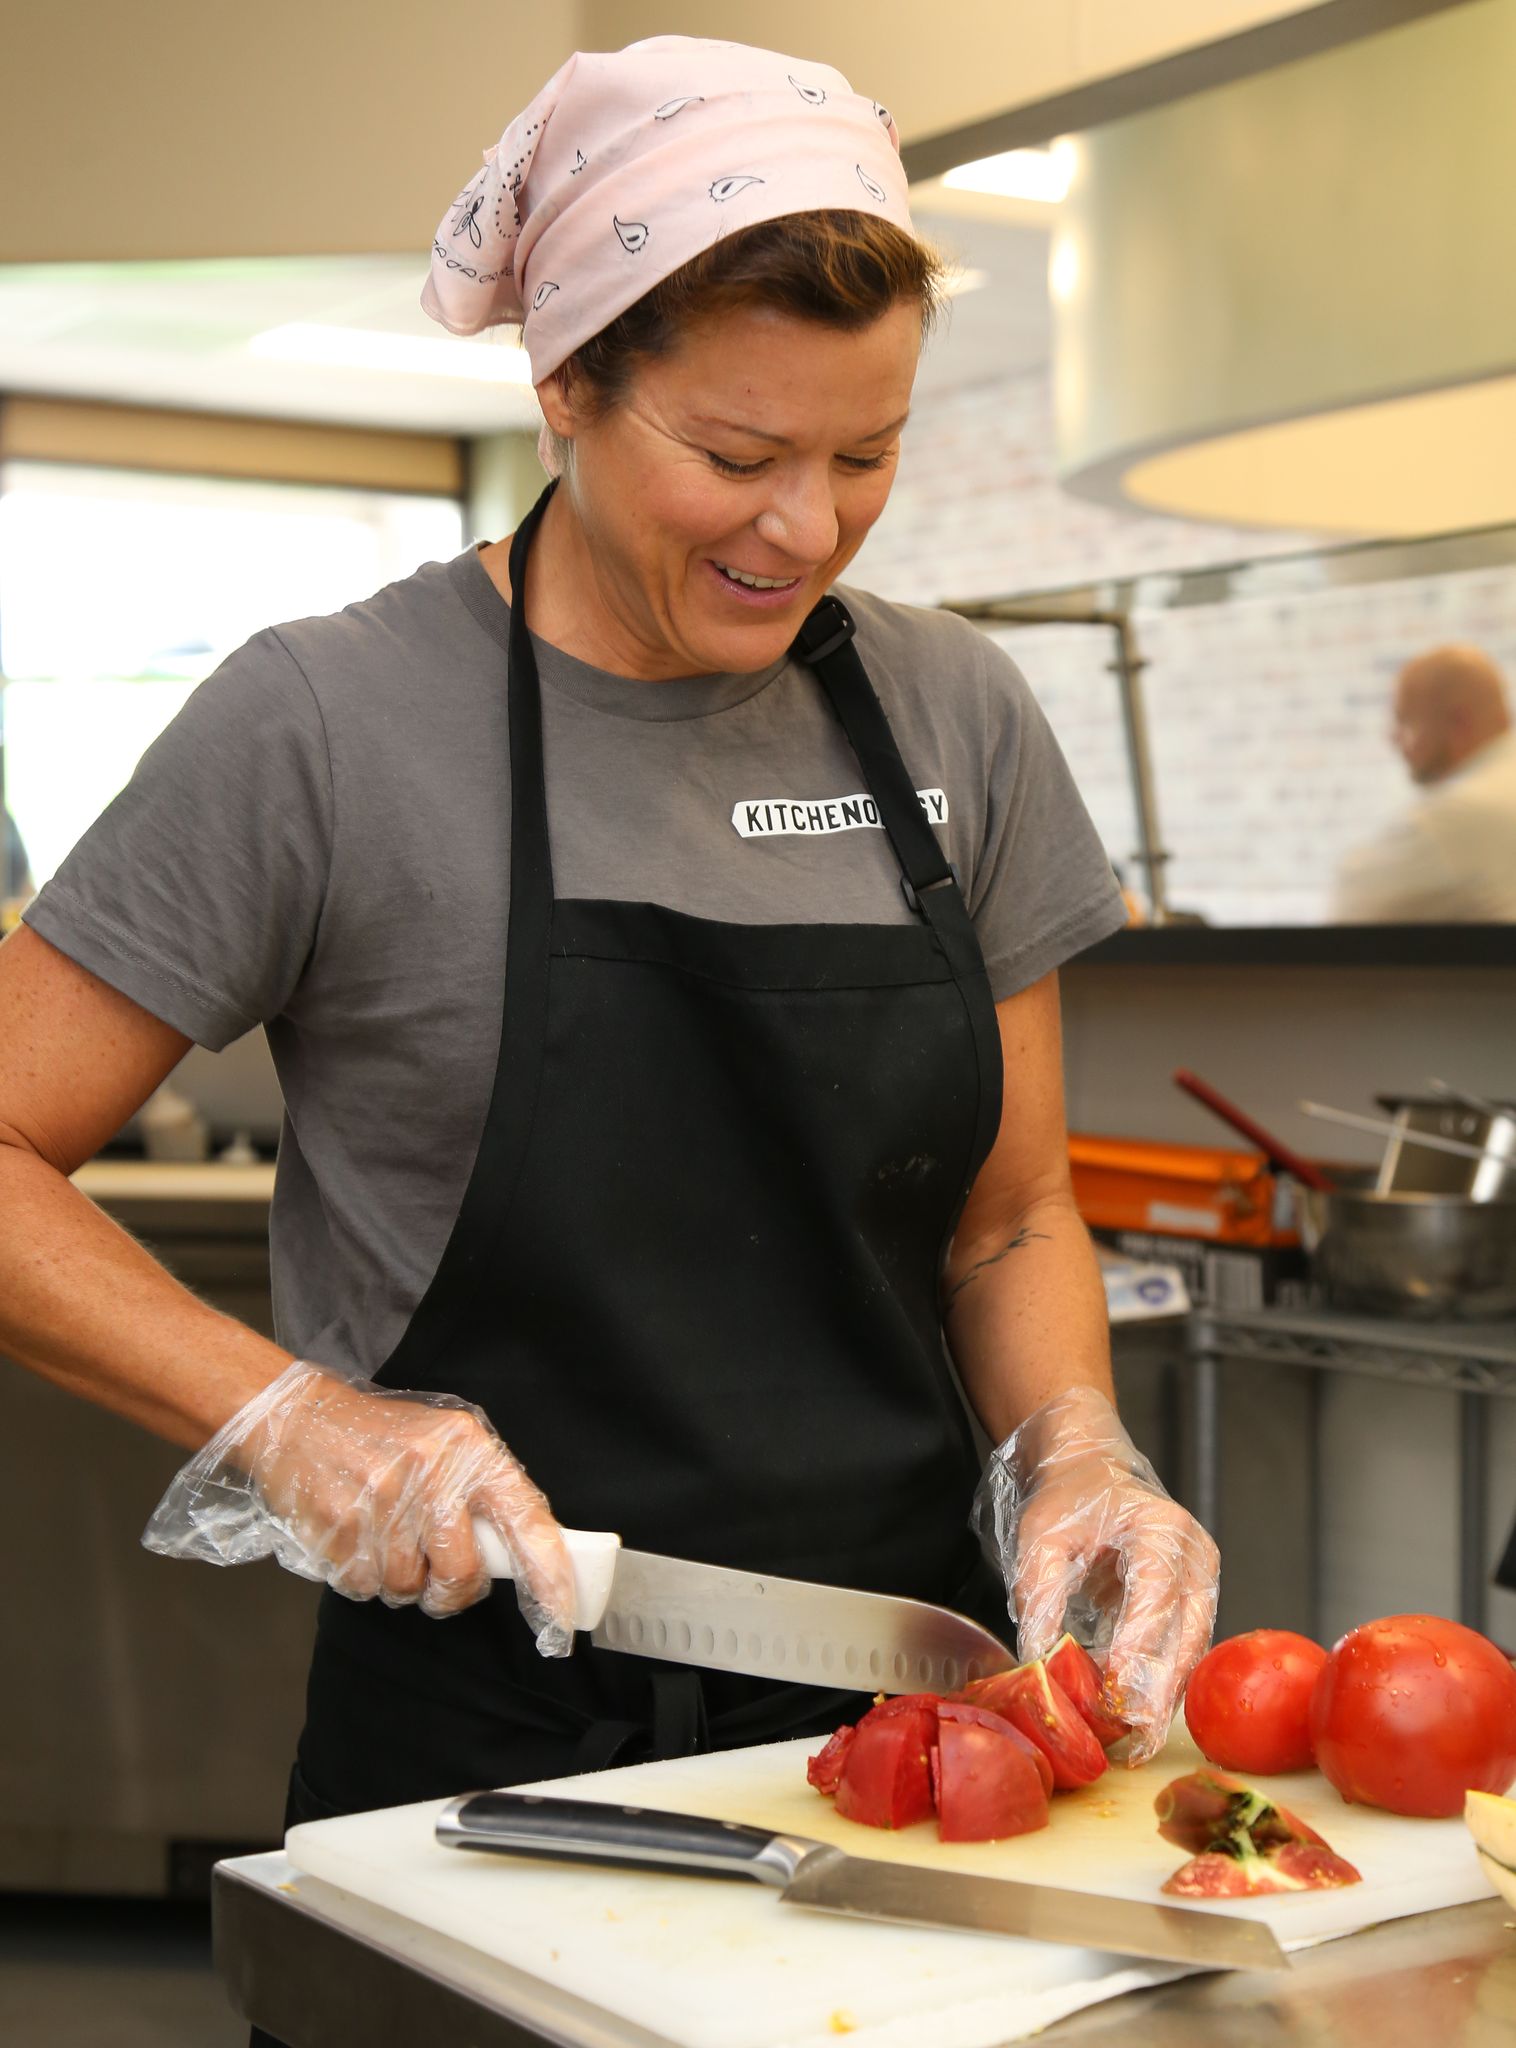 A Kitchenology staff member chops tomatoes at High Point non-profit.